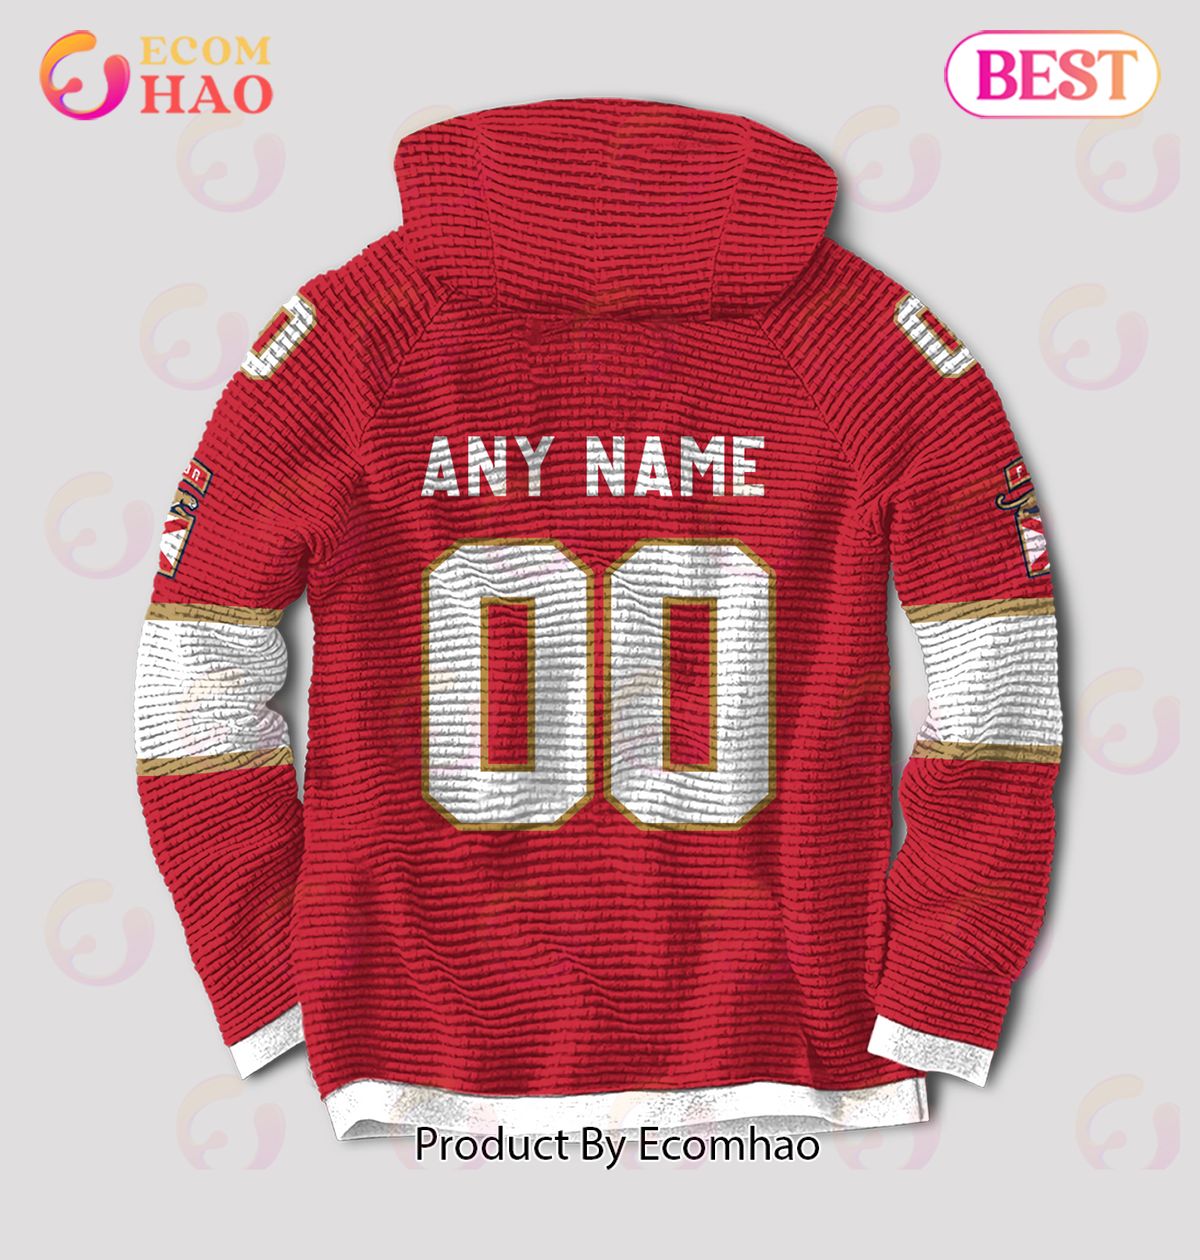 Personalized Florida Panthers Reverse Retro Hoodie Printed